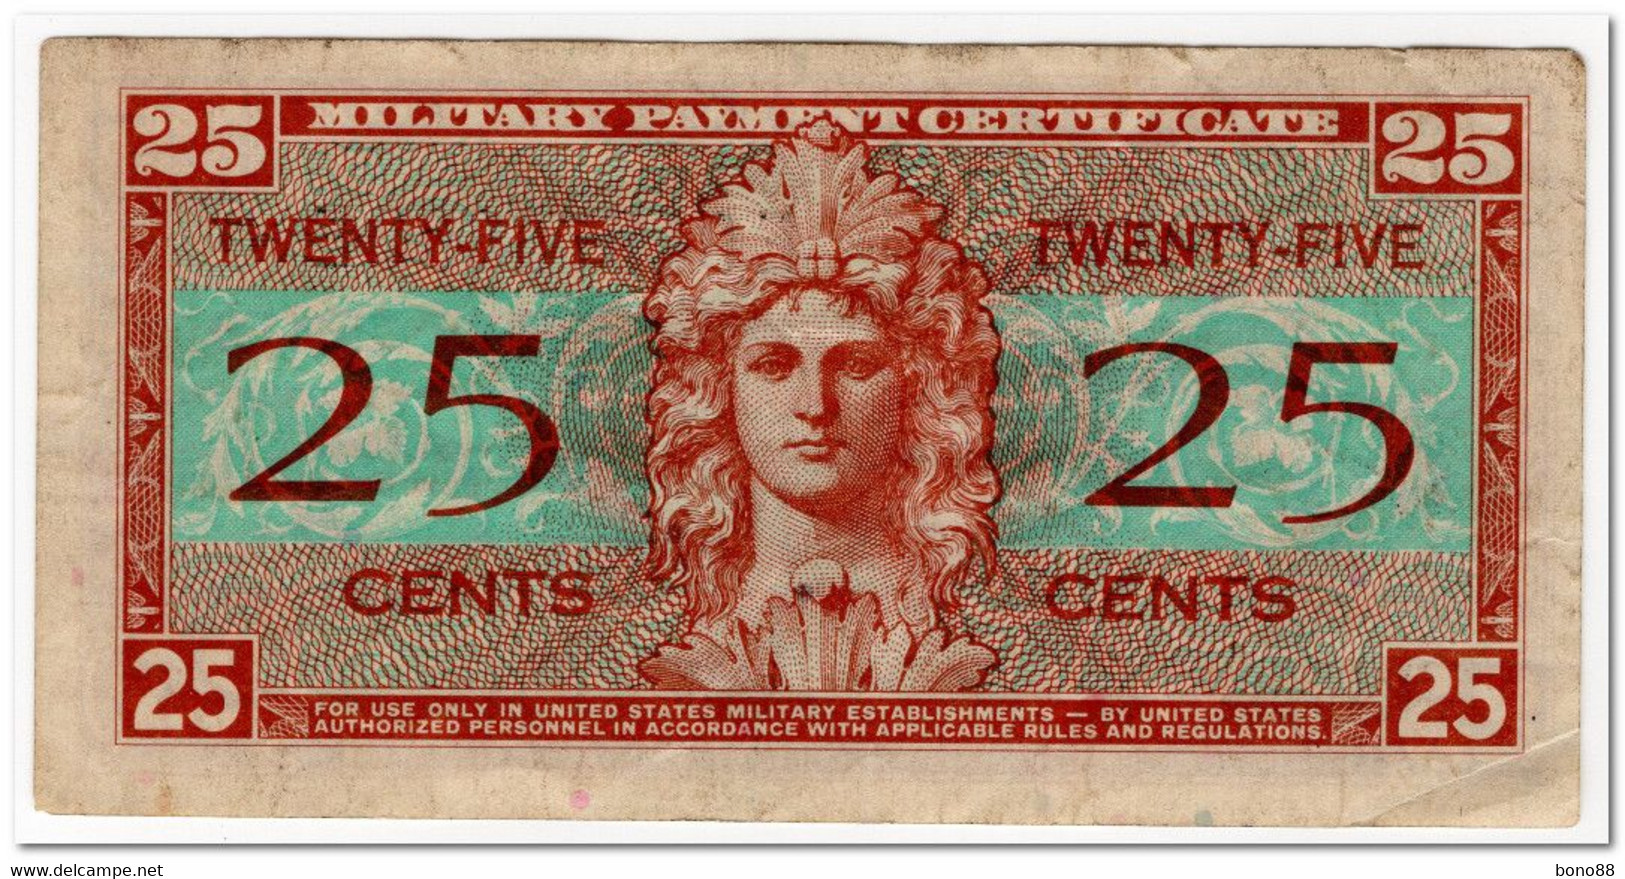 UNITED STATES,MILITARY PAYMENT CERTIFICATE,25 CENTS,1954,P.M31,VF-XF - 1954-1958 - Series 521